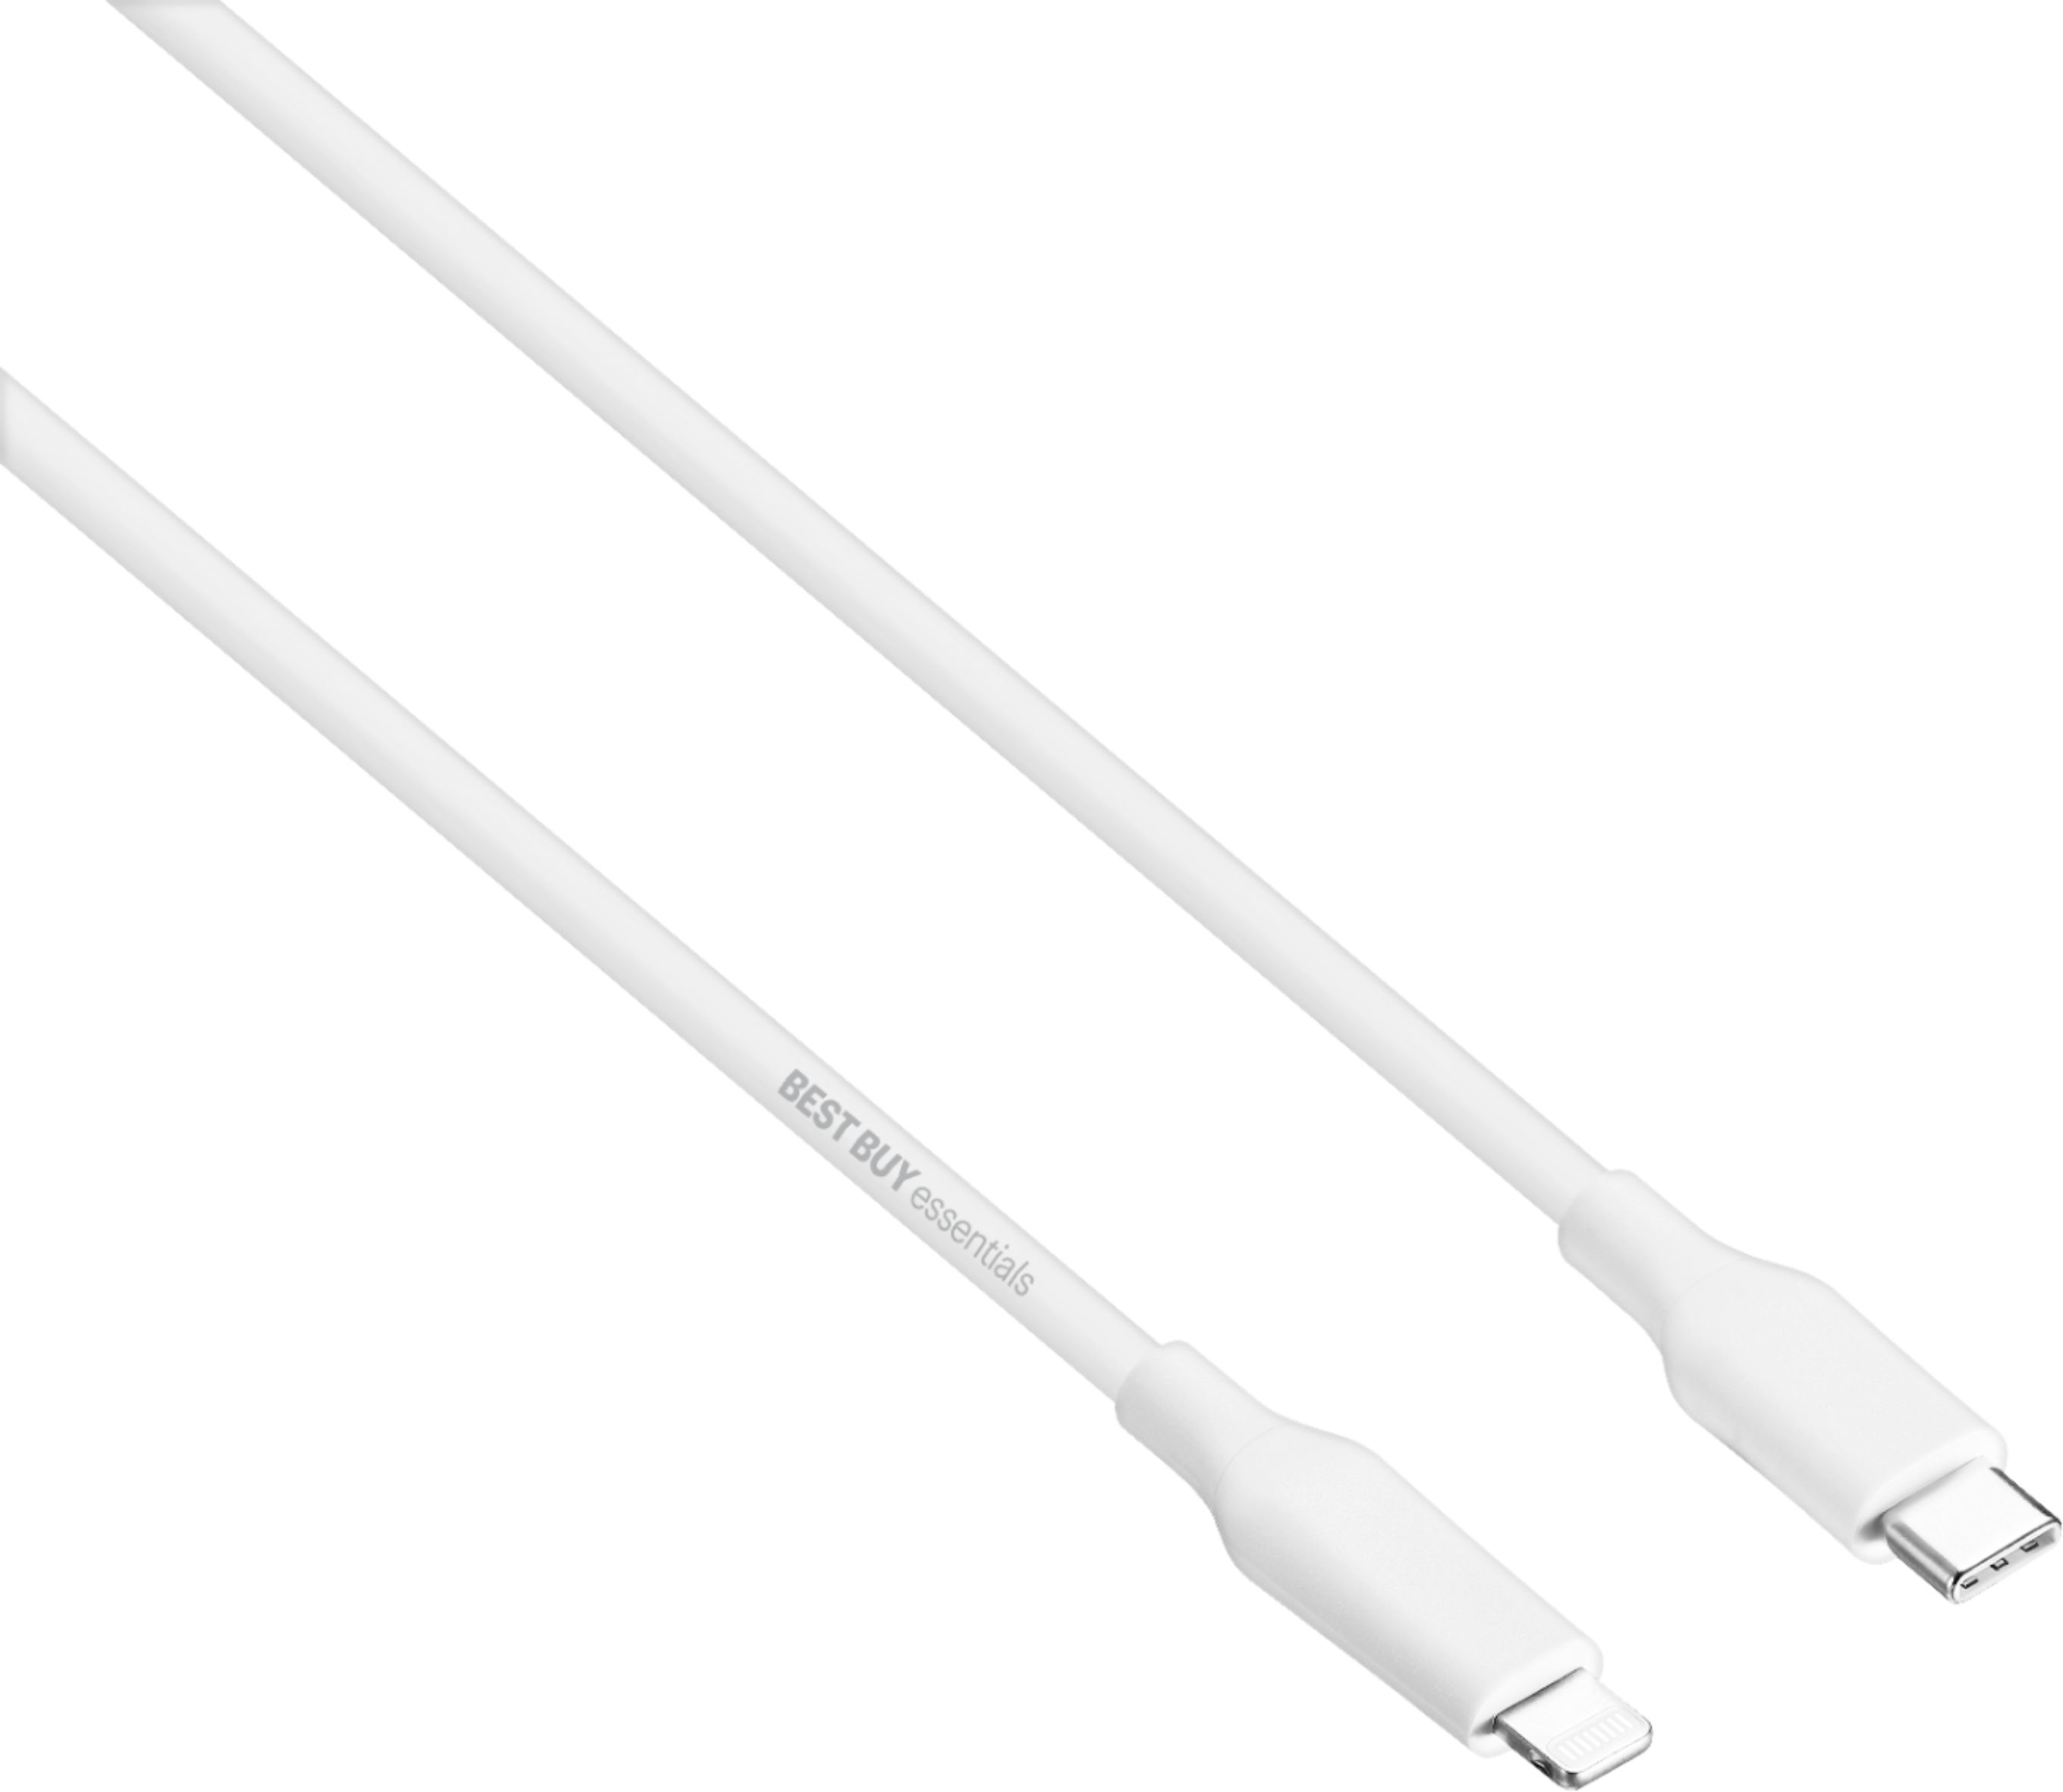 Tussendoortje Vrijwel mineraal Best Buy essentials™ 9' Lightning to USB-C Charge-and-Sync Cable White  BE-MLC922W - Best Buy